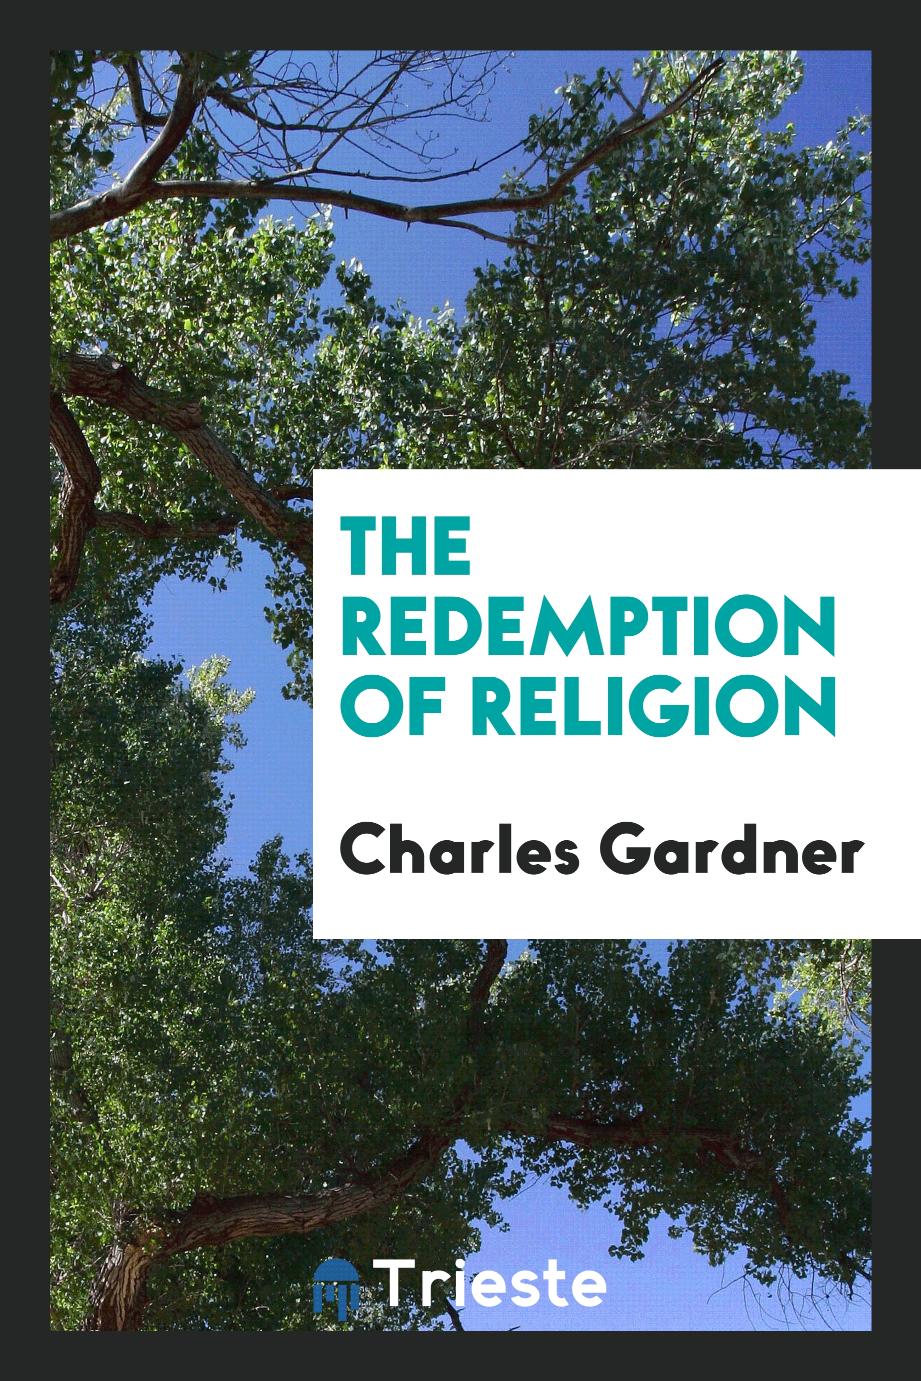 The Redemption of Religion